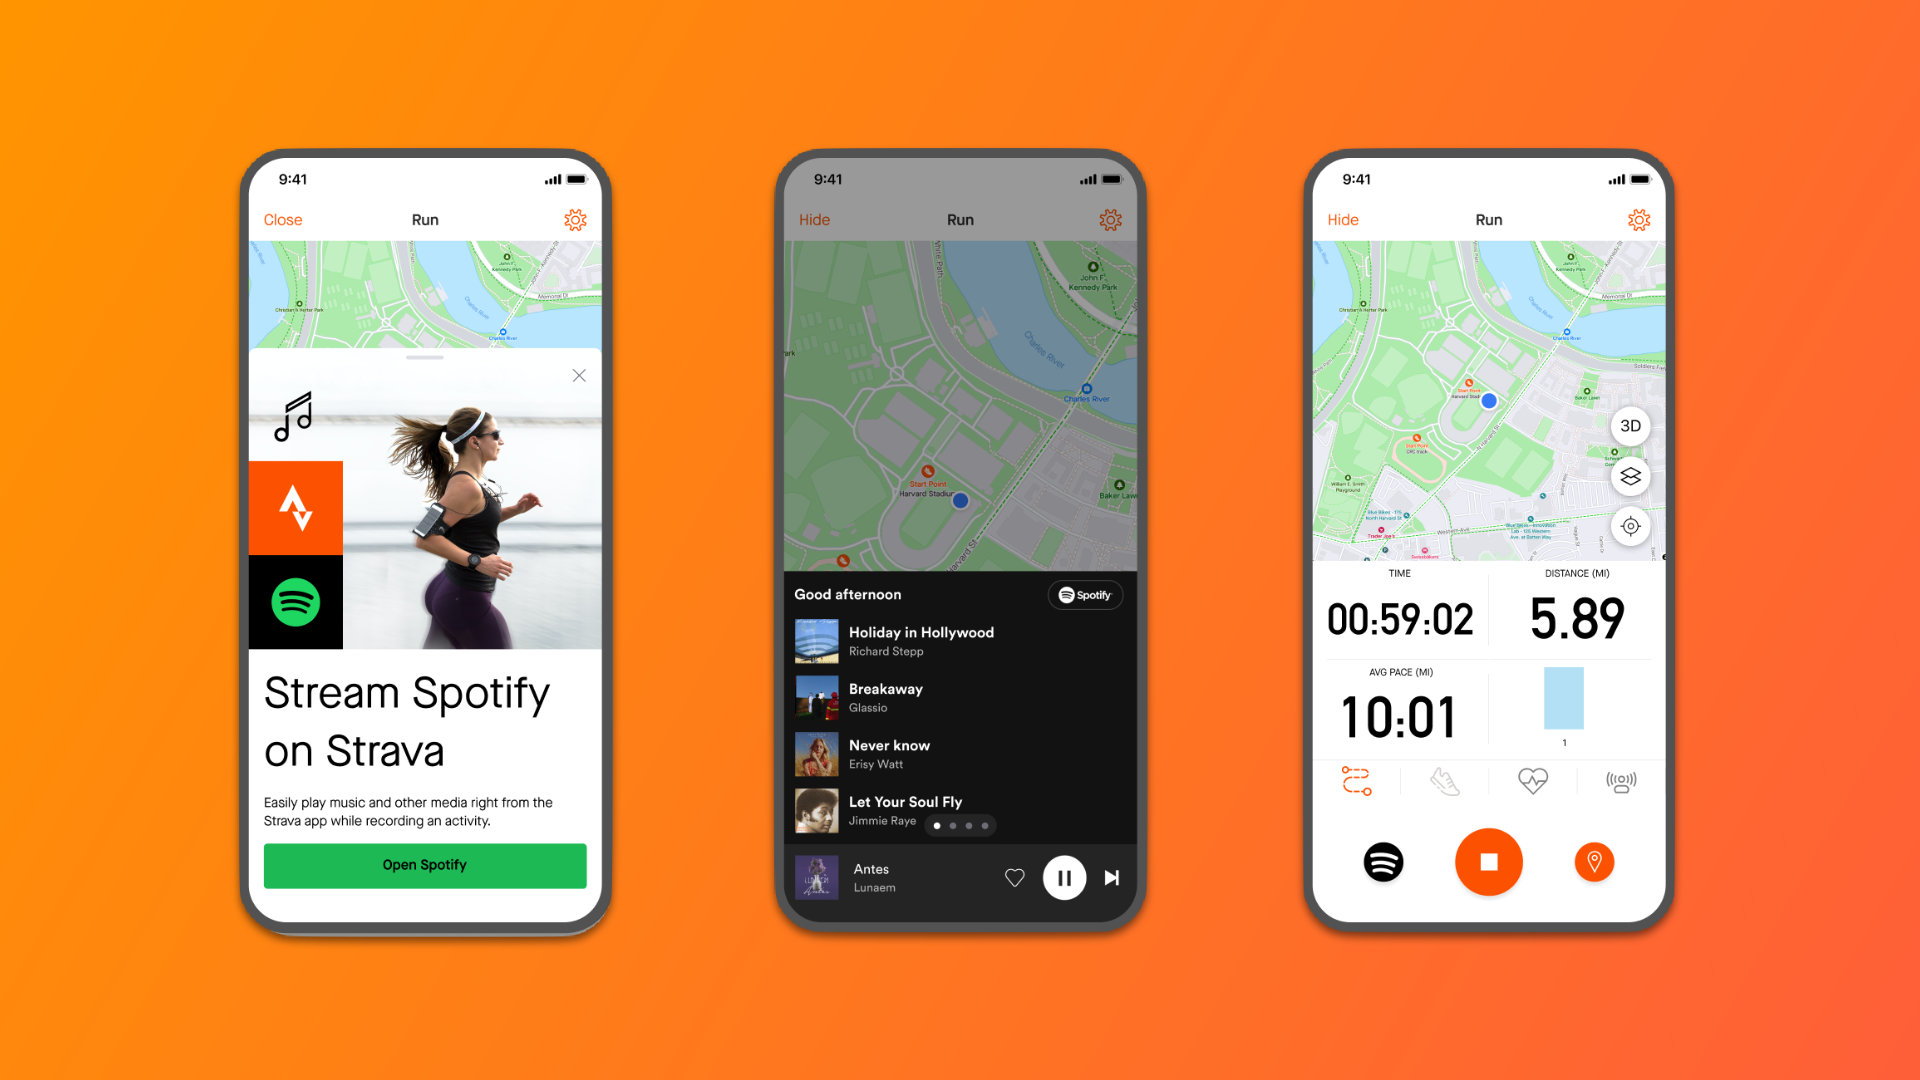 Strava fitness app now works with Spotify in its latest update